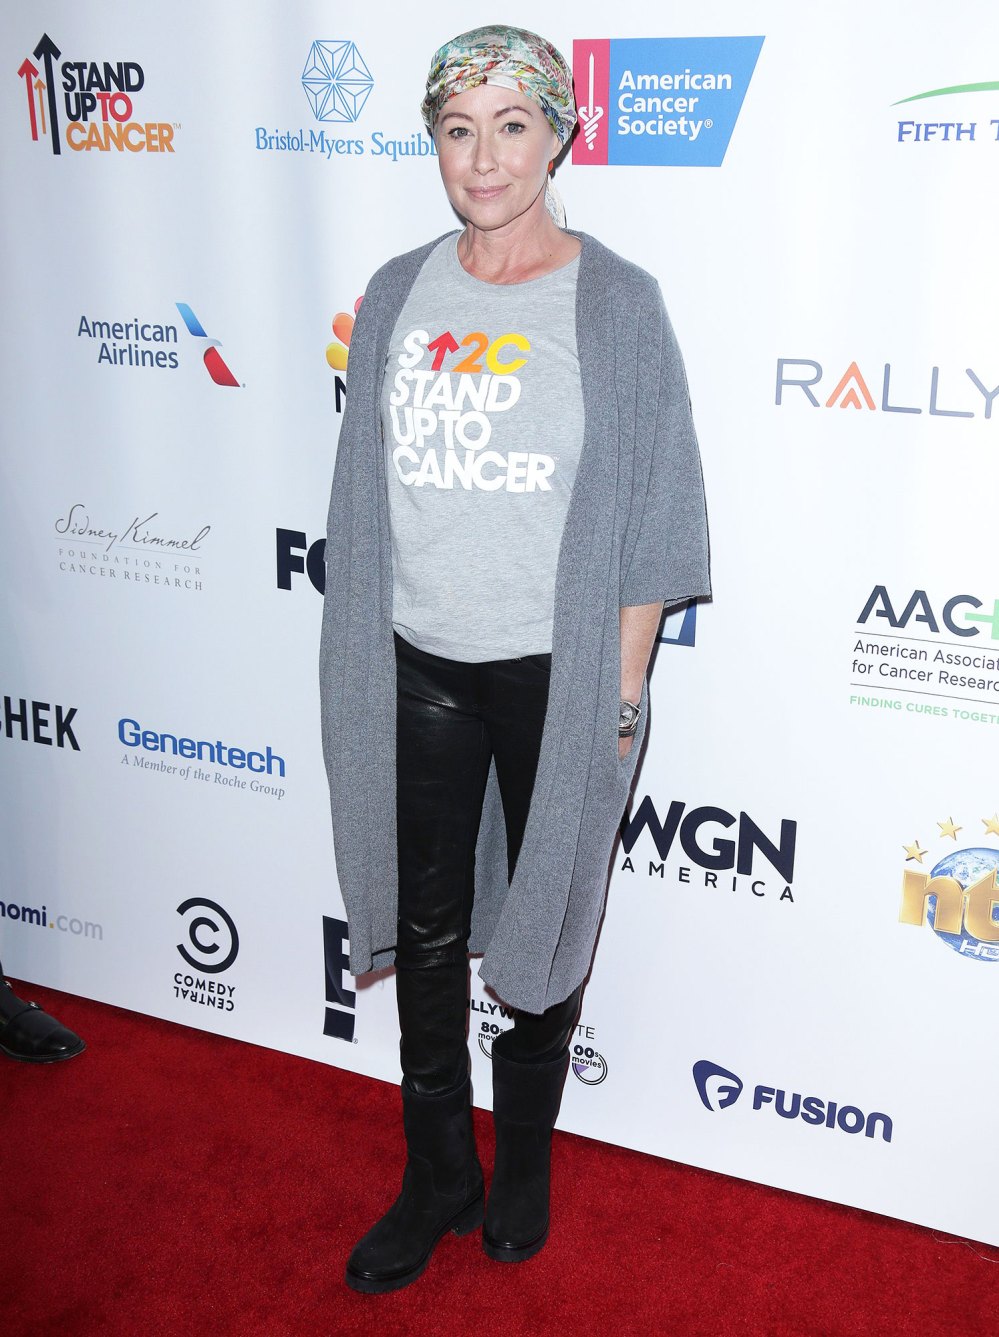 Shannen Doherty Walks the Red Carpet at Stand Up to Cancer Event, Is ‘Nearly Done’ With Chemo